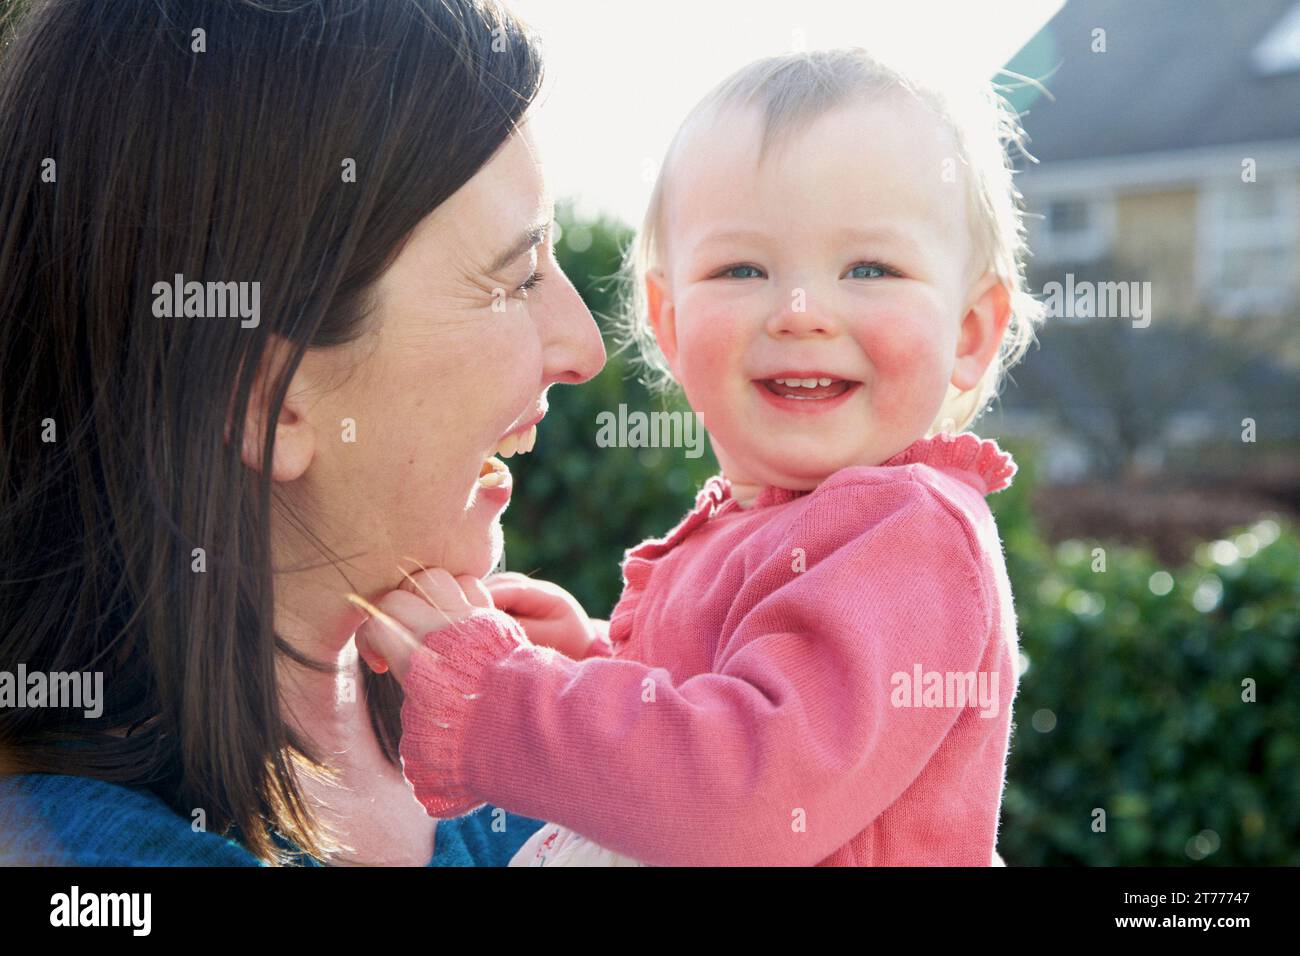 Mother Holding Baby Girl Outdoors Stock Photo